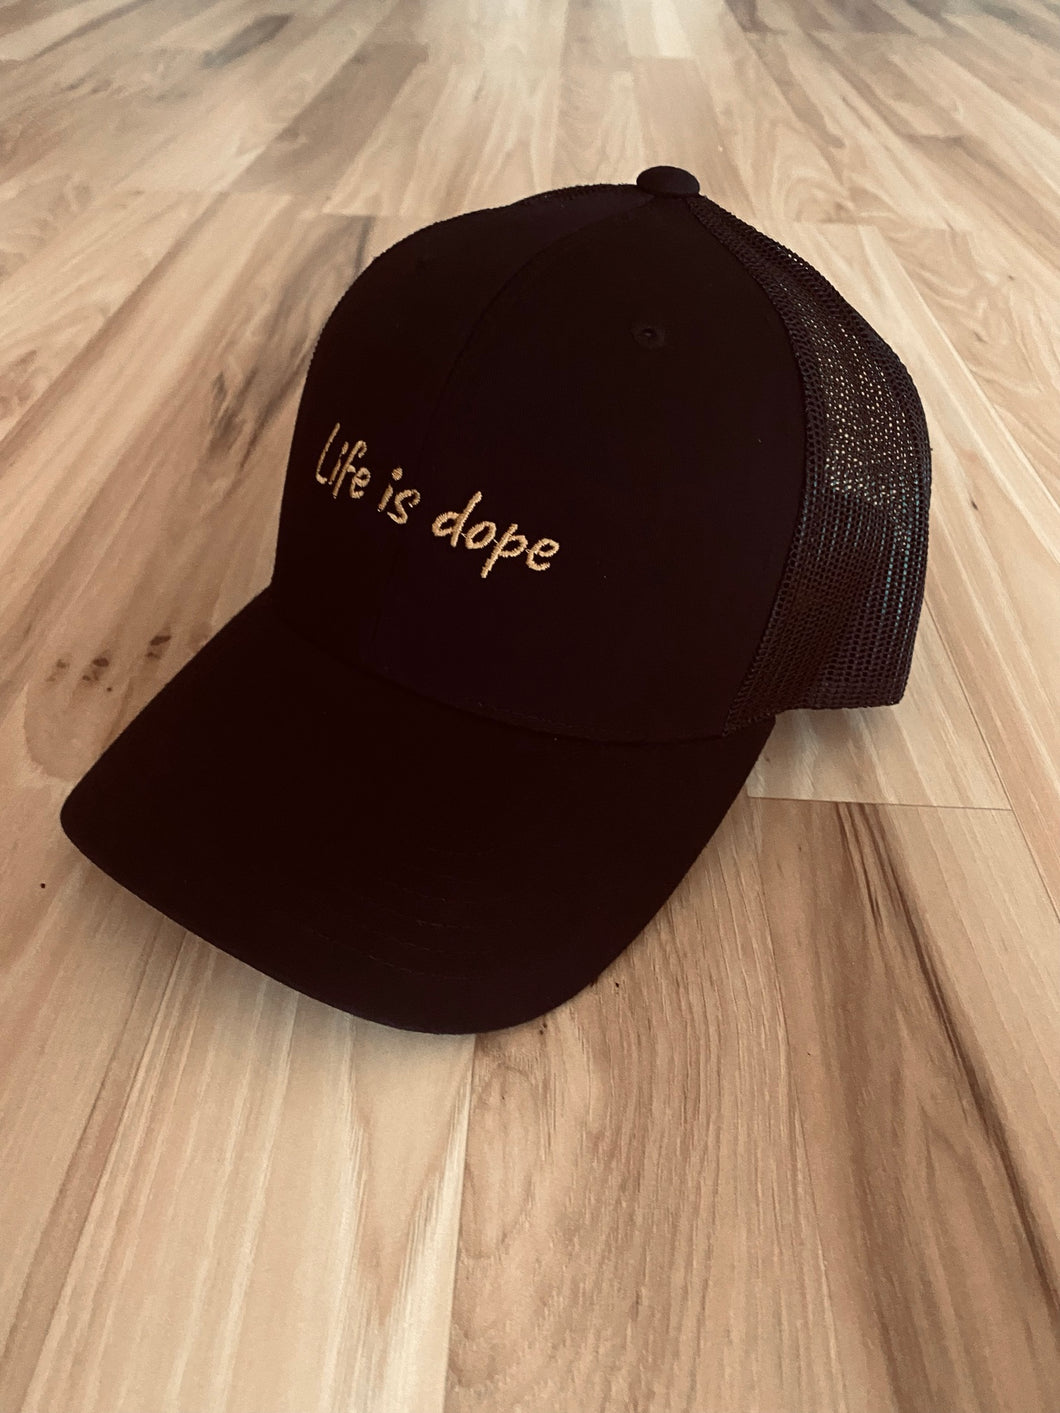 Life is Dope Trucker Hat (2 colors)